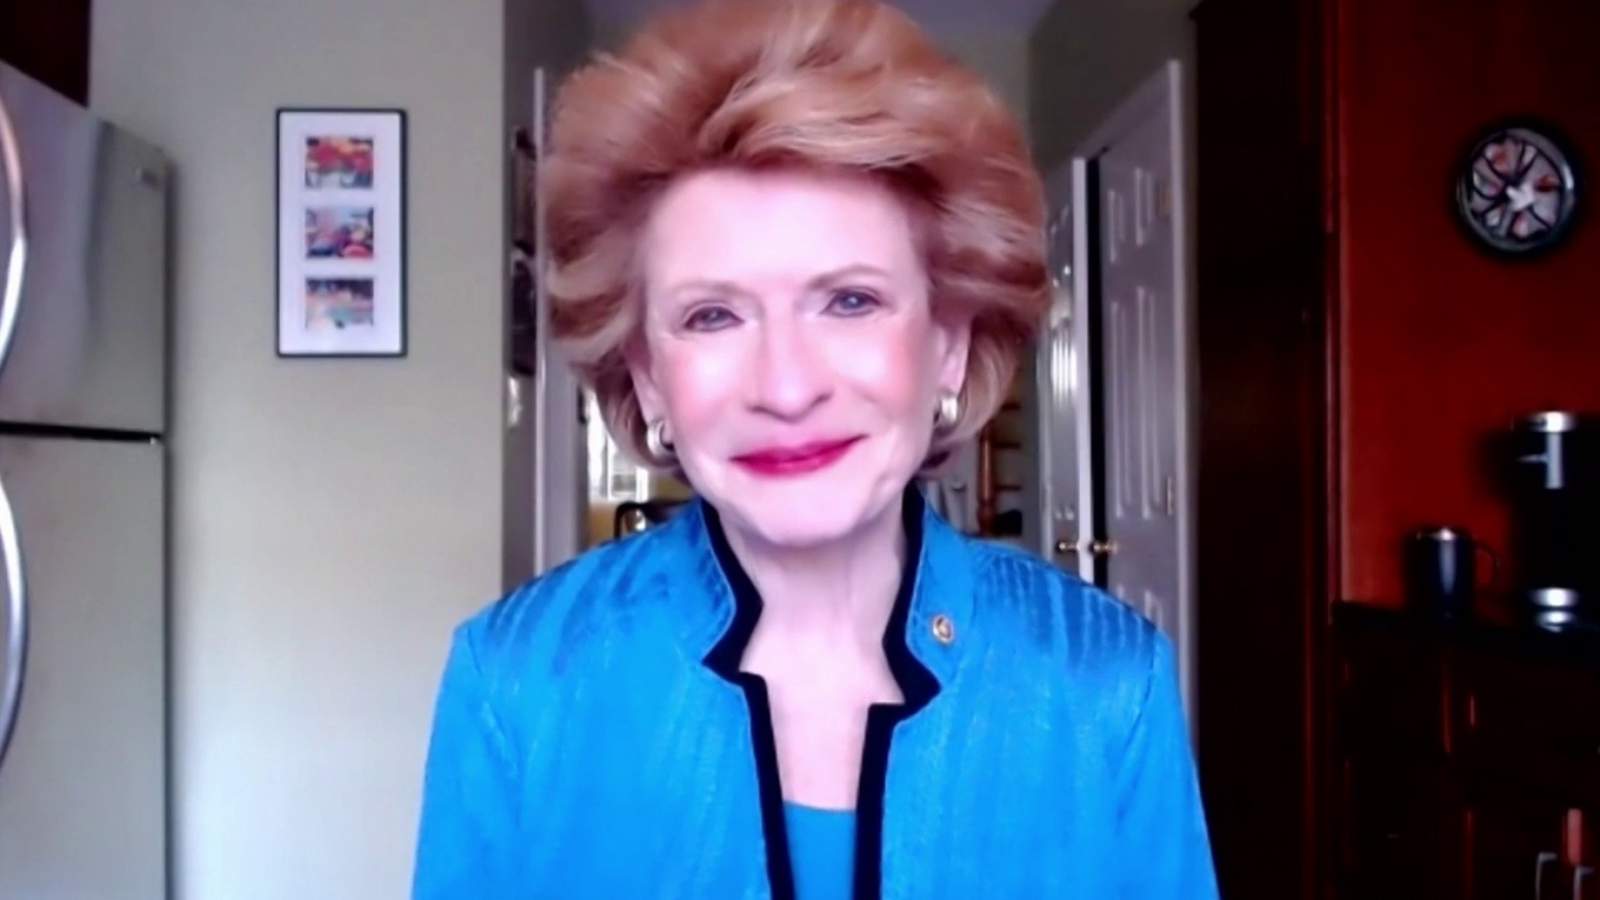 ‘Our democracy has survived’ -- Sen. Debbie Stabenow reflects on unique, historic inauguration